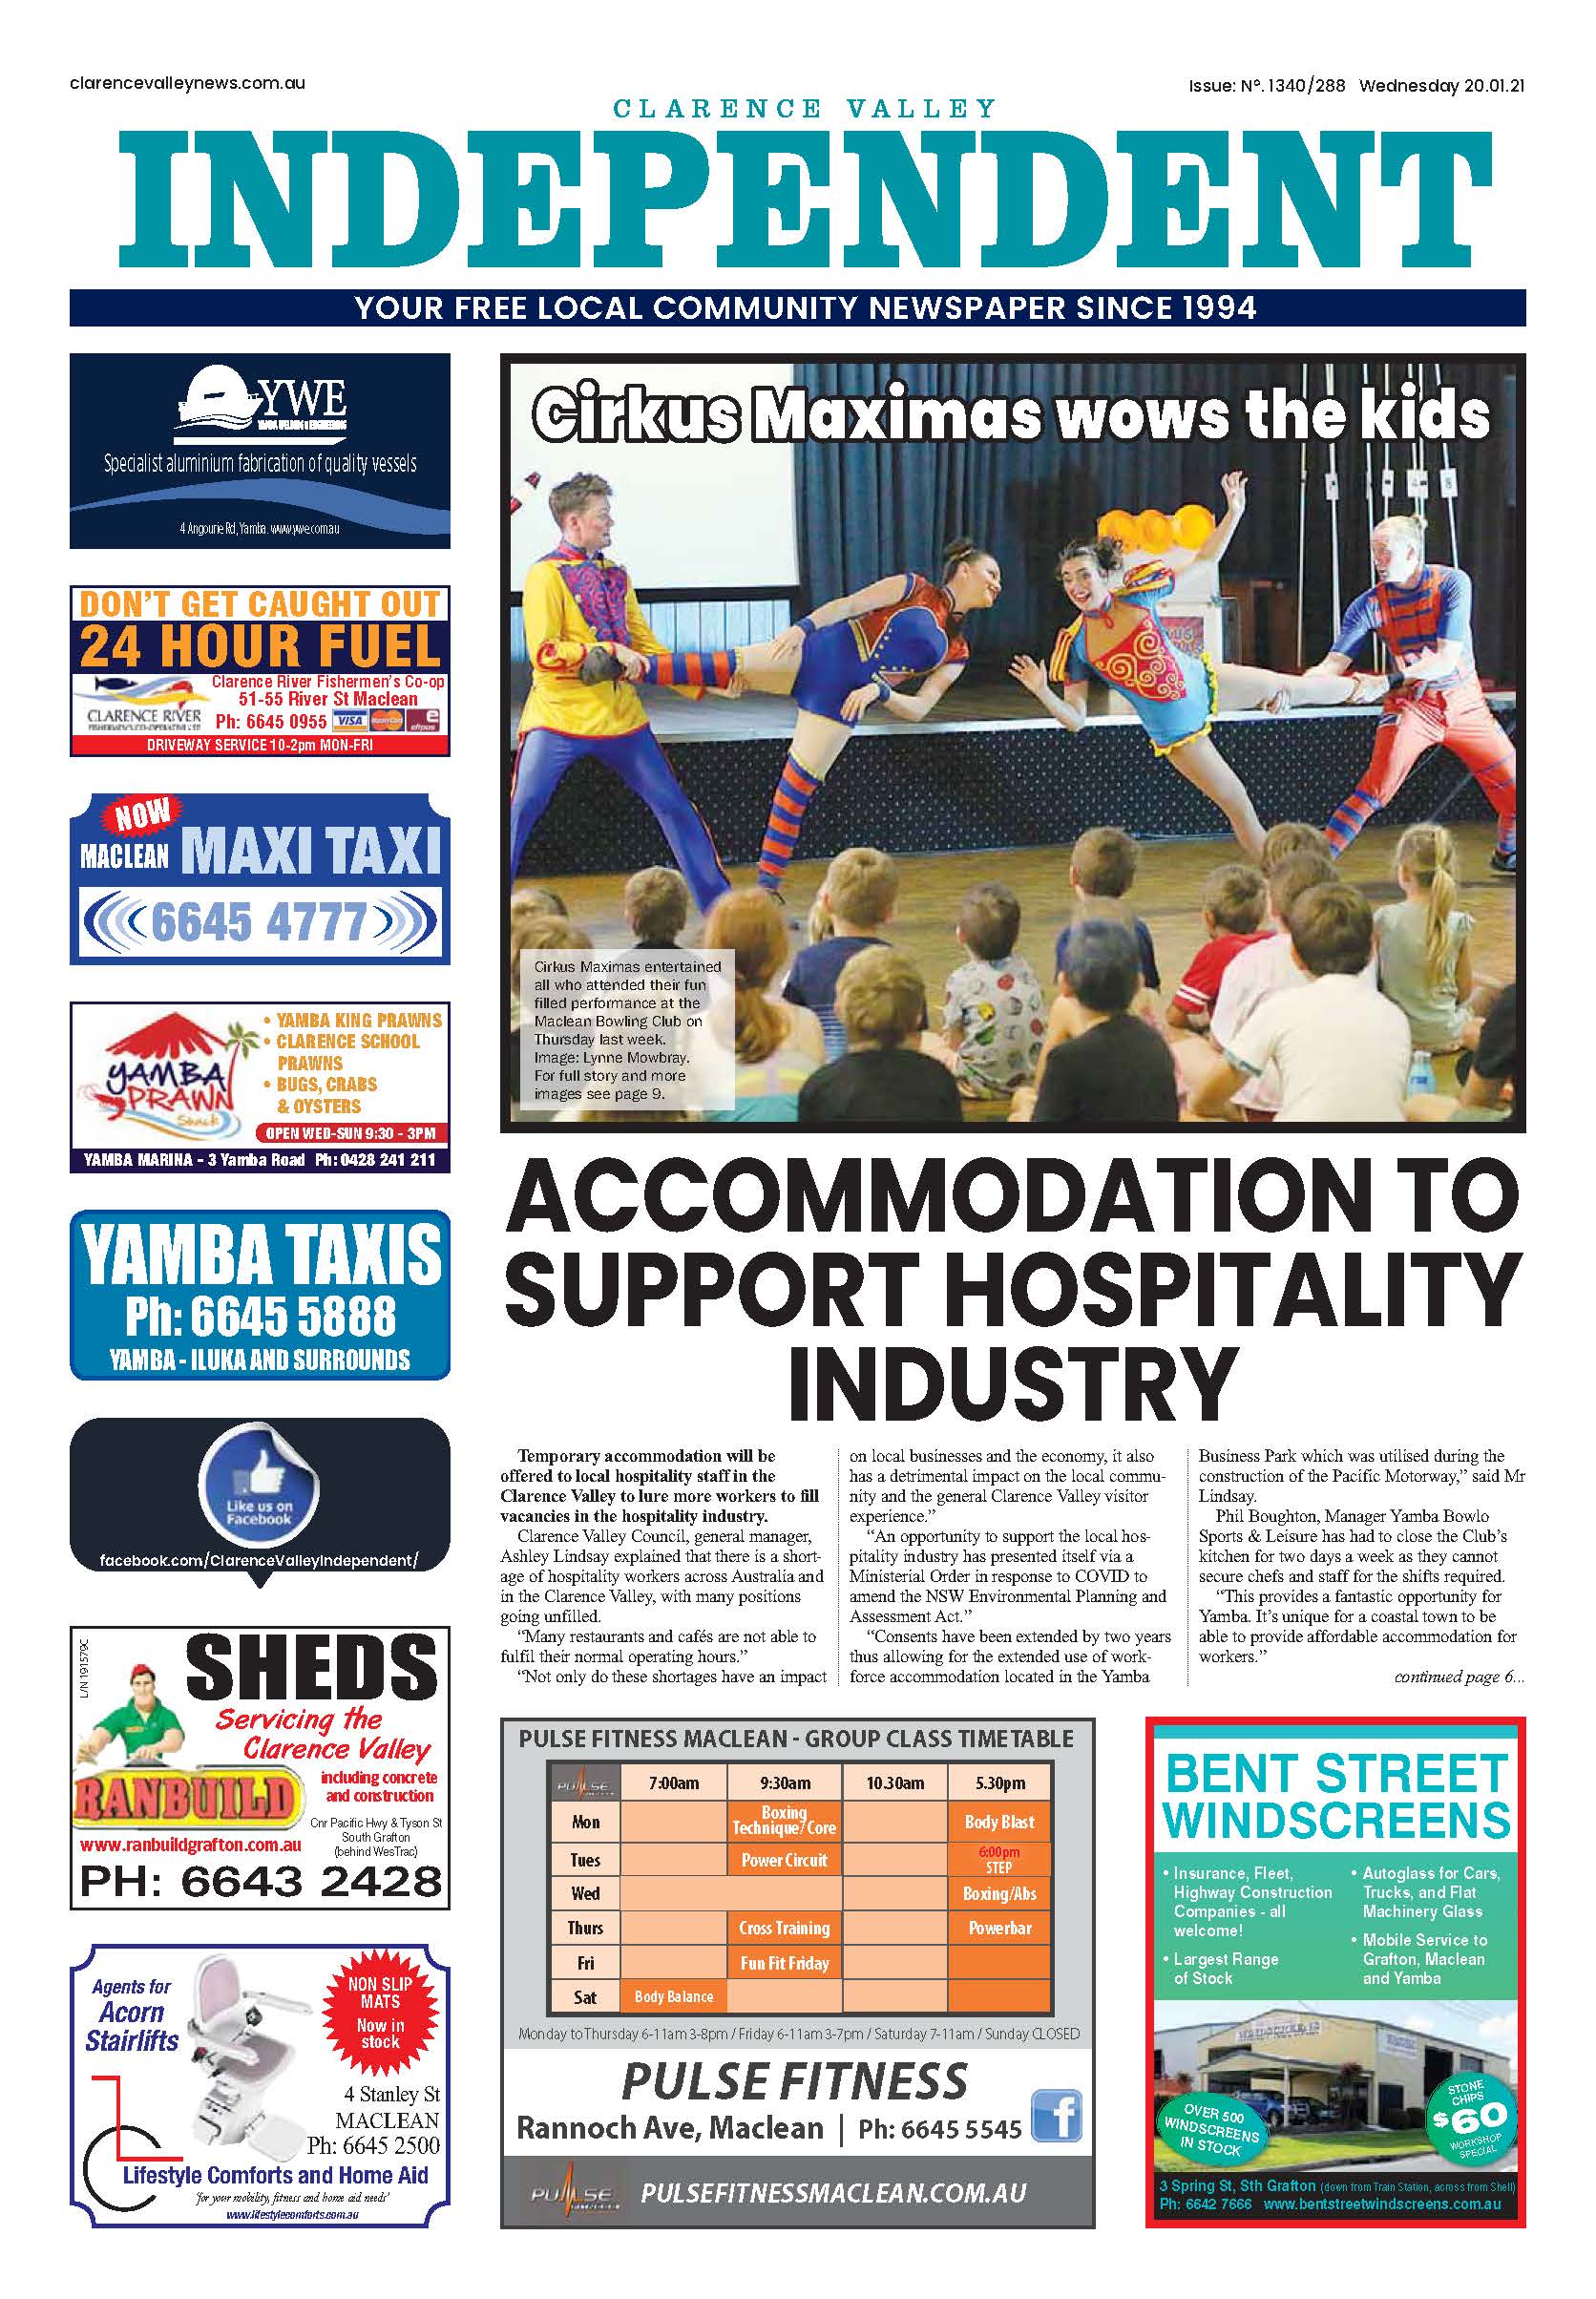 Clarence Valley Independent, 20 January 2021